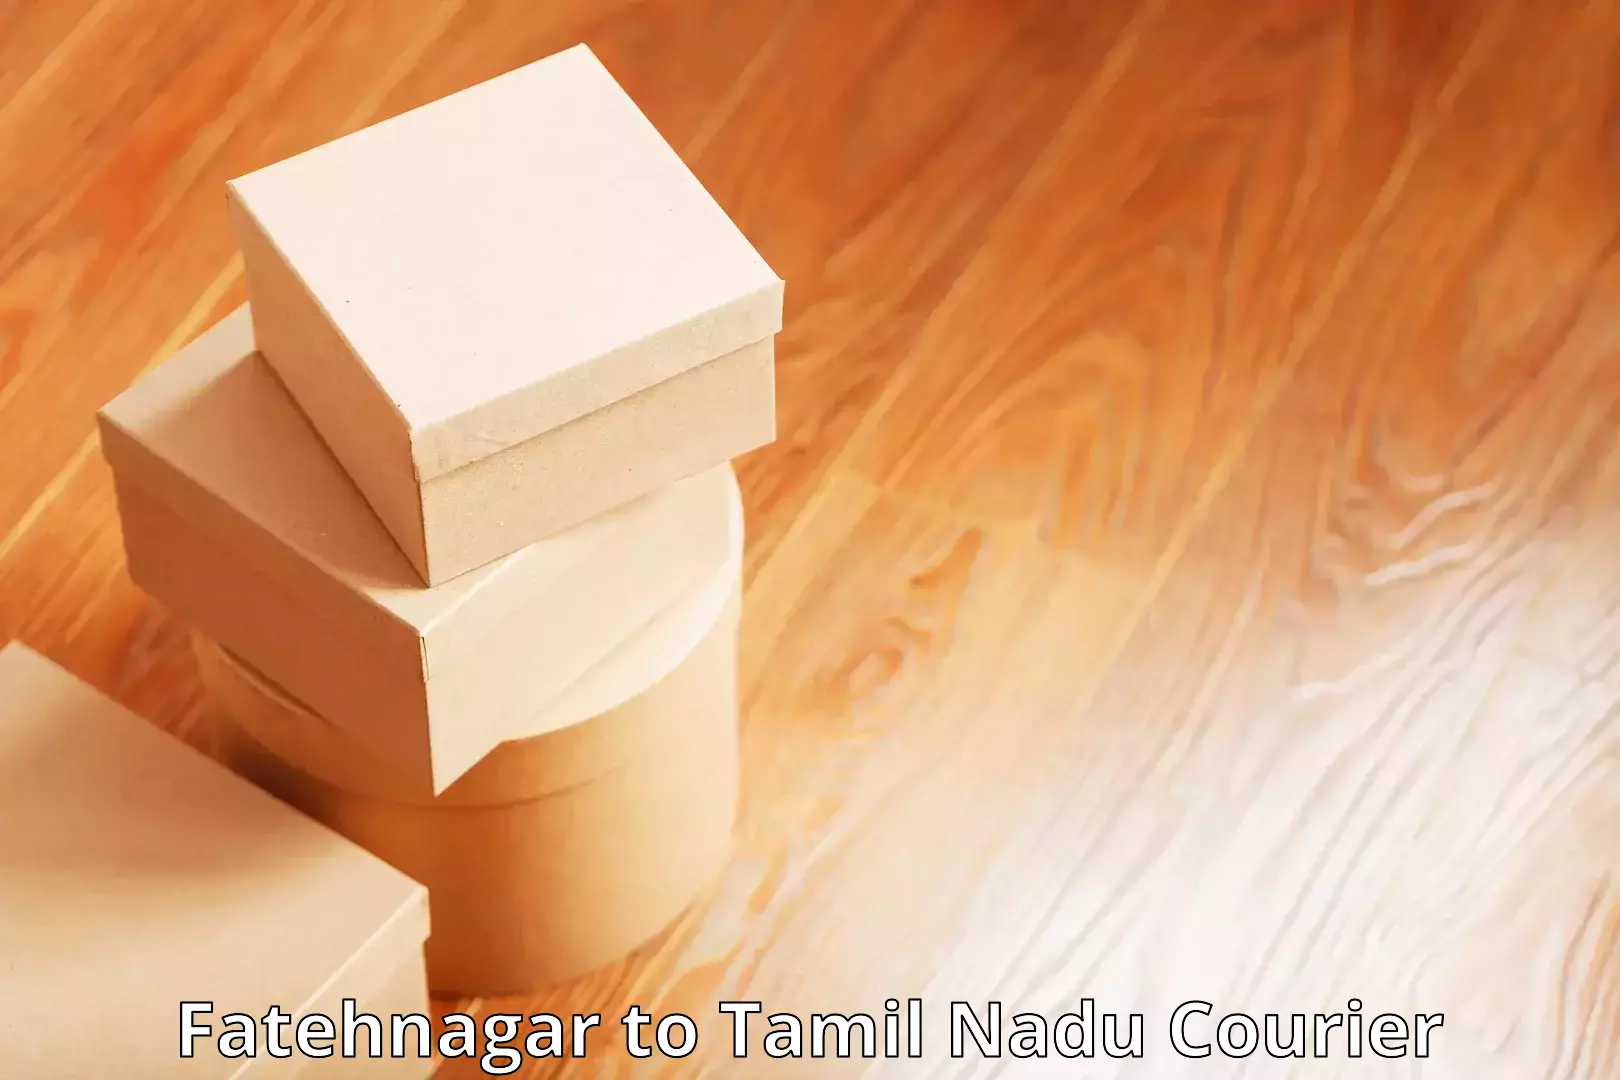 Subscription-based courier Fatehnagar to Tenkasi